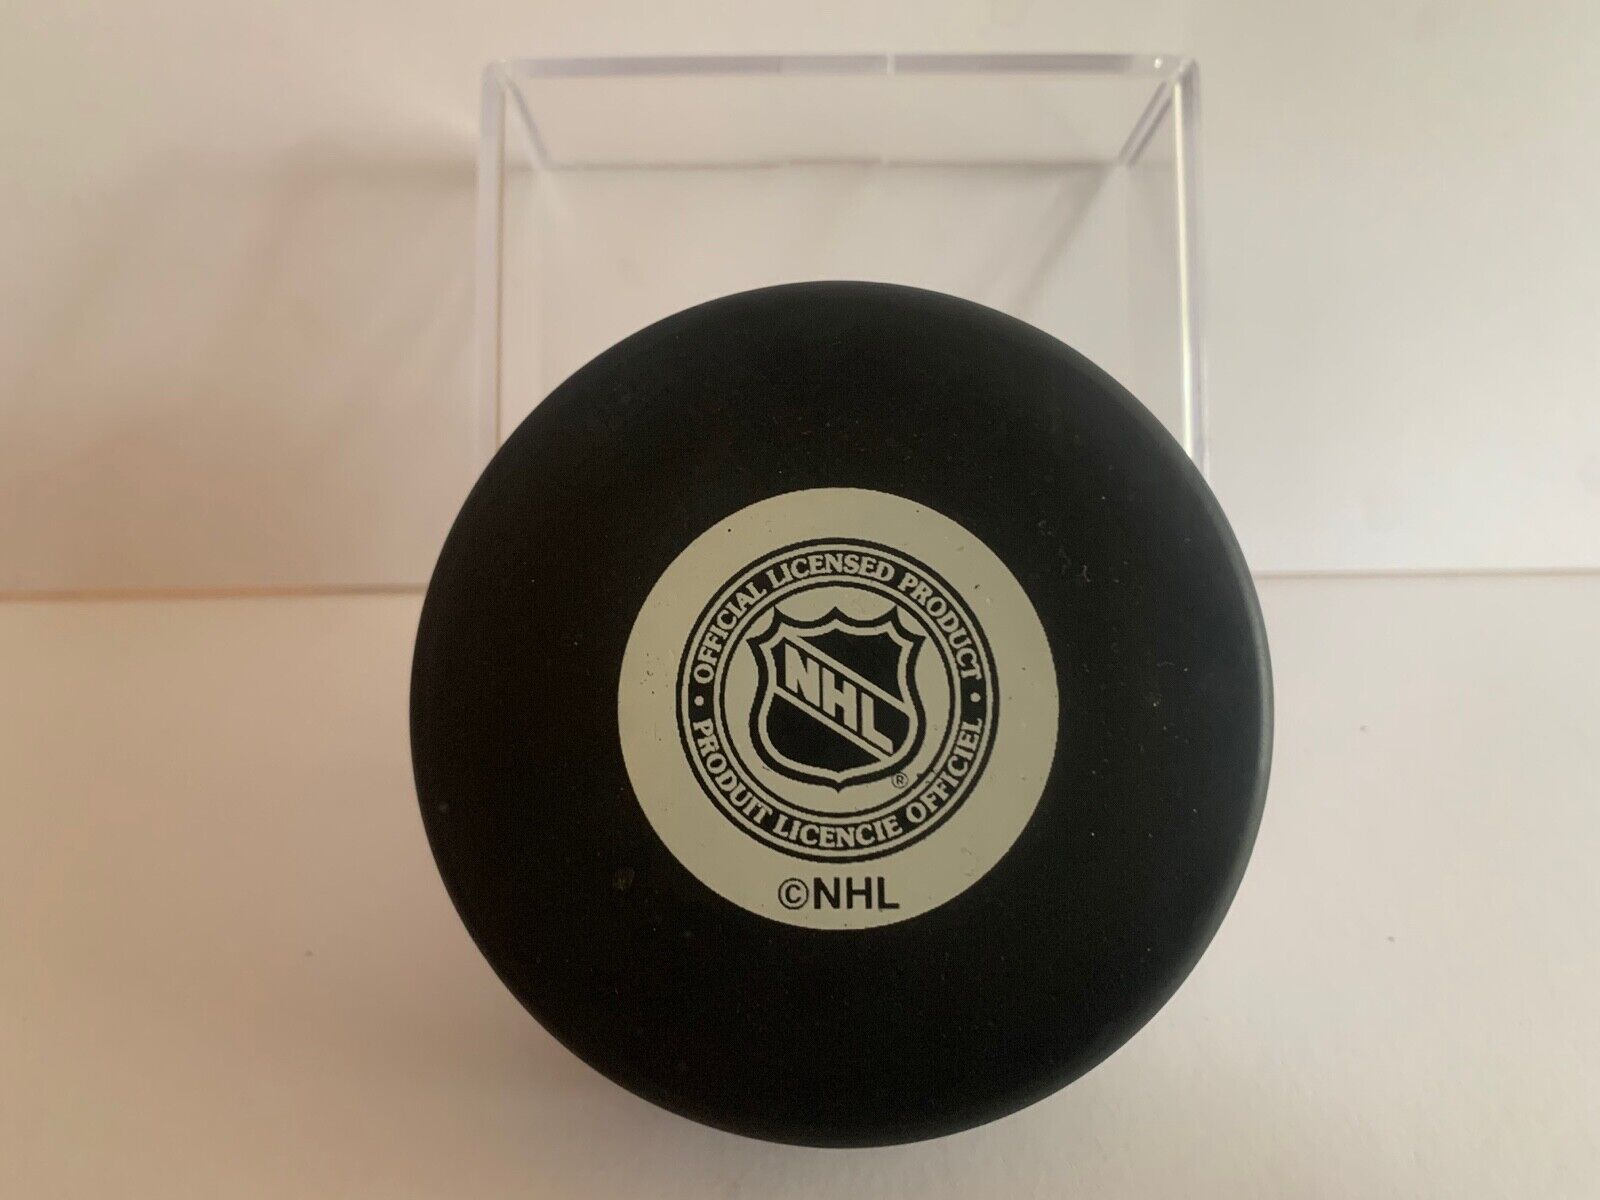 Eric Cairns Autographed Official NHL Hockey Puck New York Islanders Logo